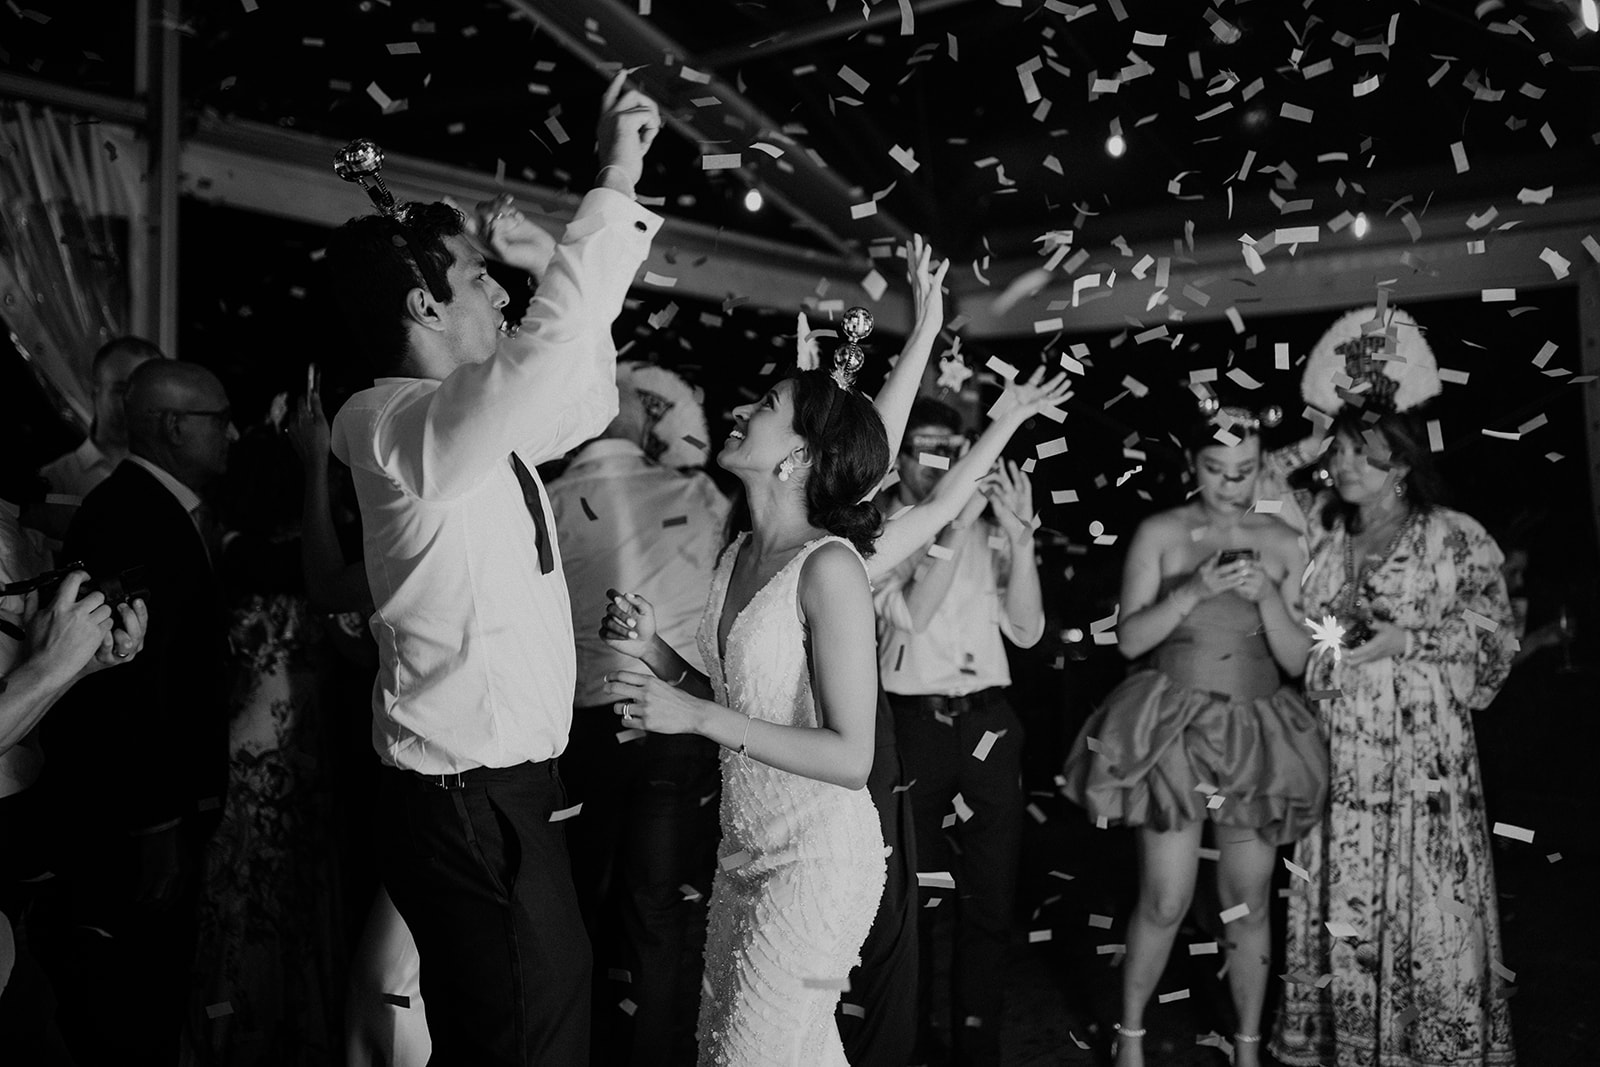 Bride and groom confetti shower at the reception at the Wedding in Mona Farm Braidwood, New South Wales